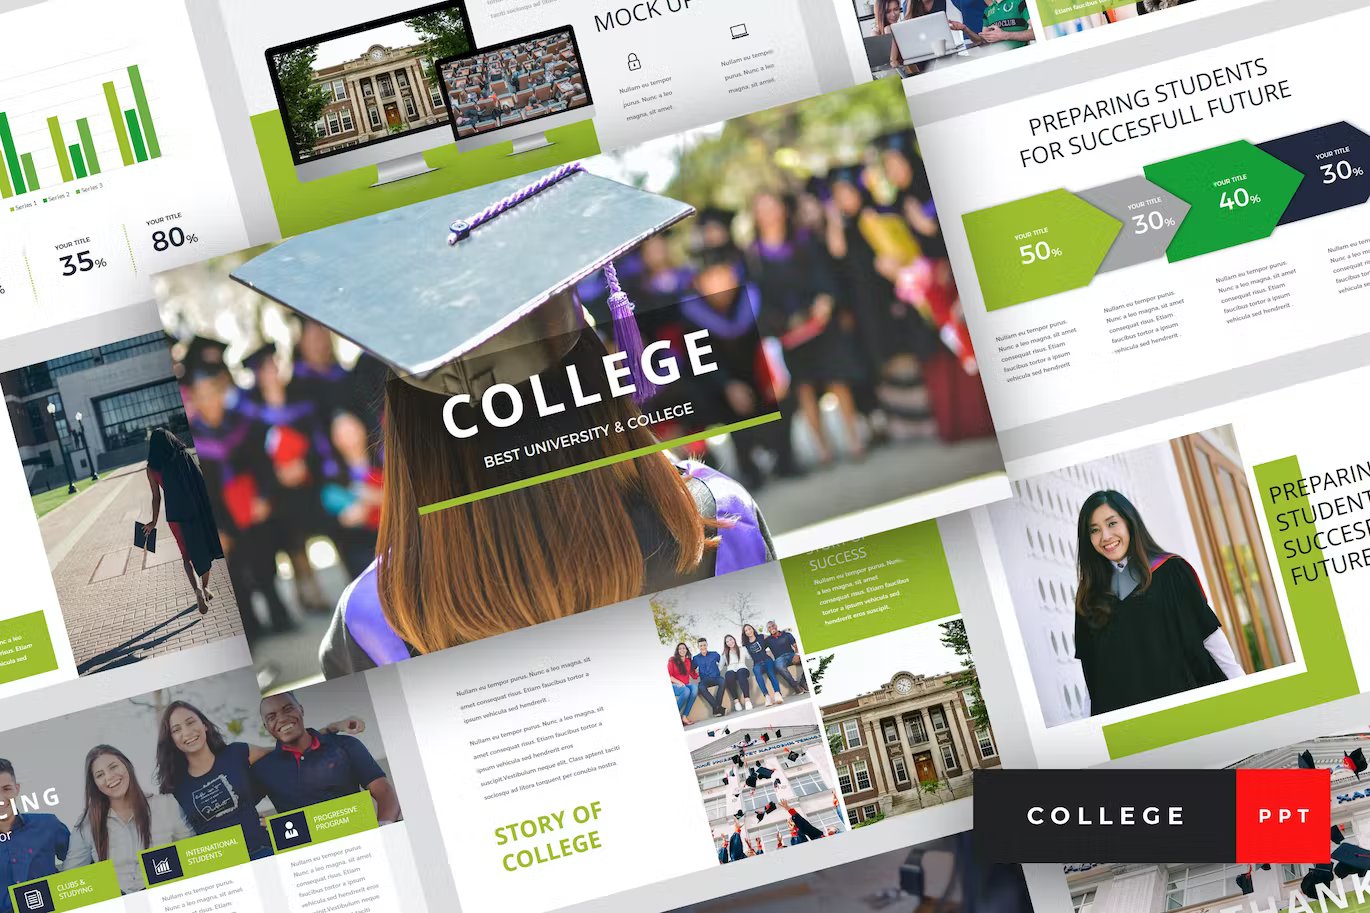 A set of different college university presentation templates in green, gray, white and black on a gray background.